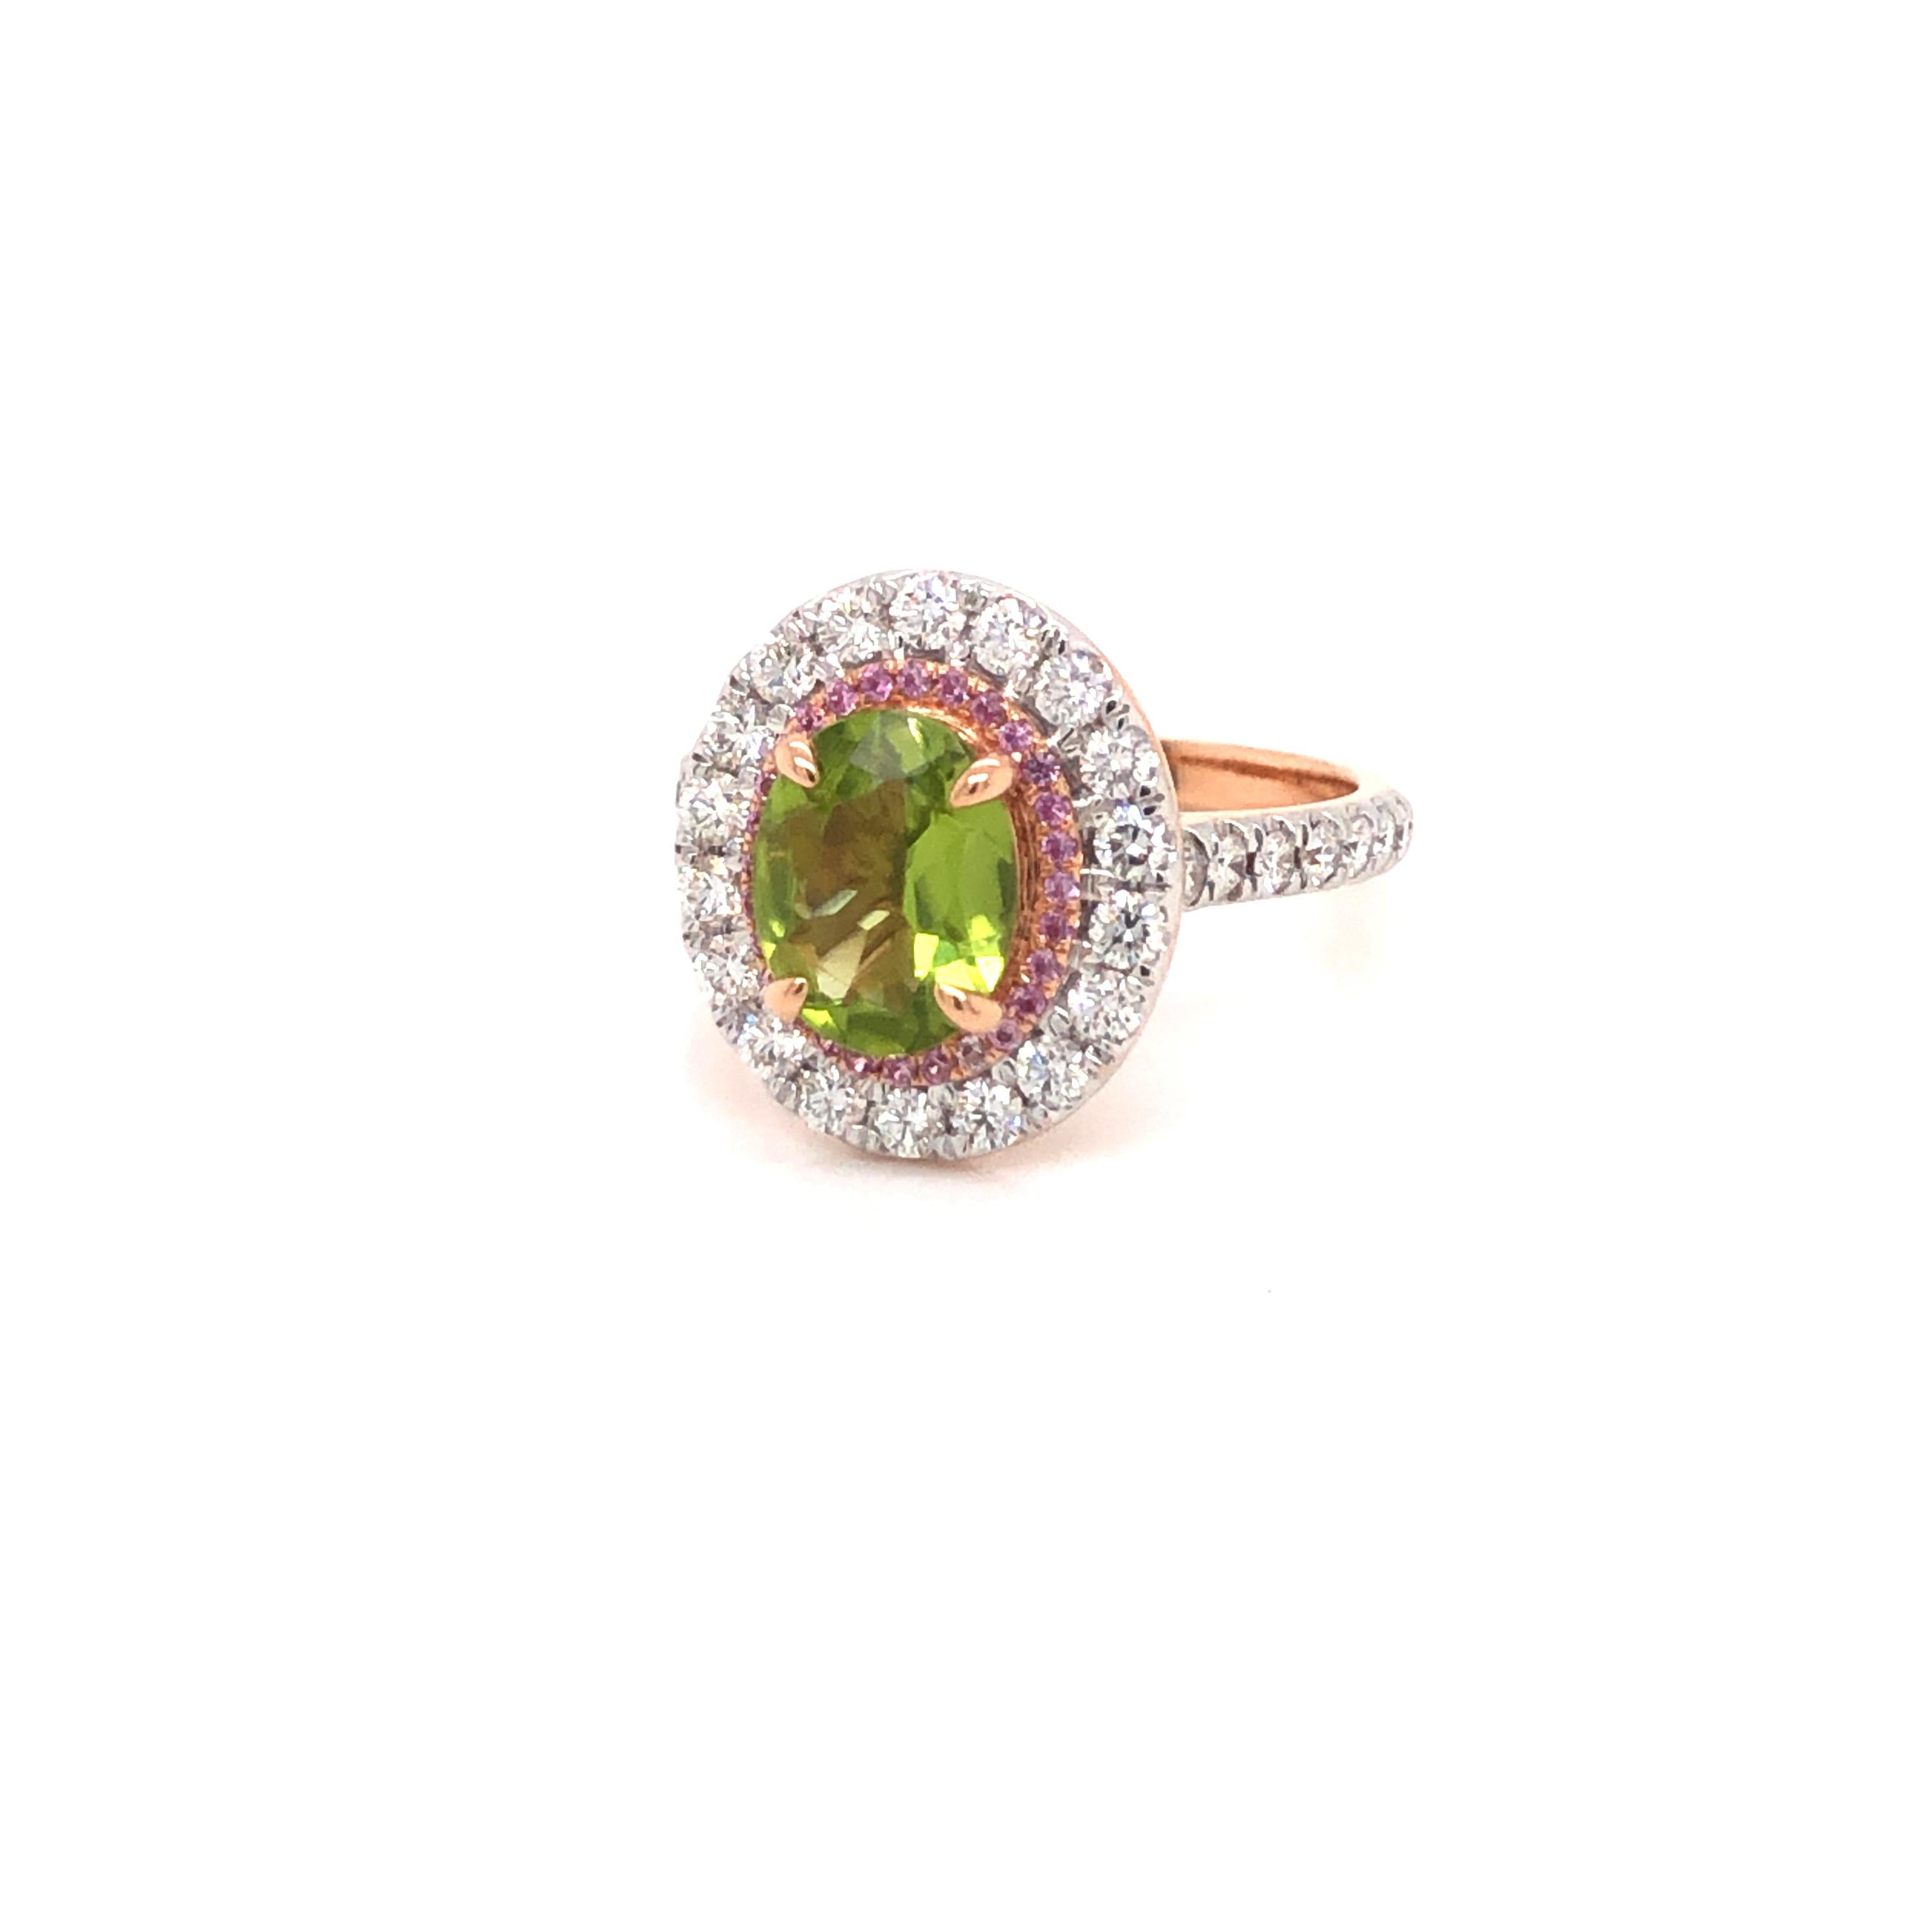 2.5 Carat Green Peridot Pink Sapphire Diamond Engagement Cocktail 18KT Ring For Sale 8